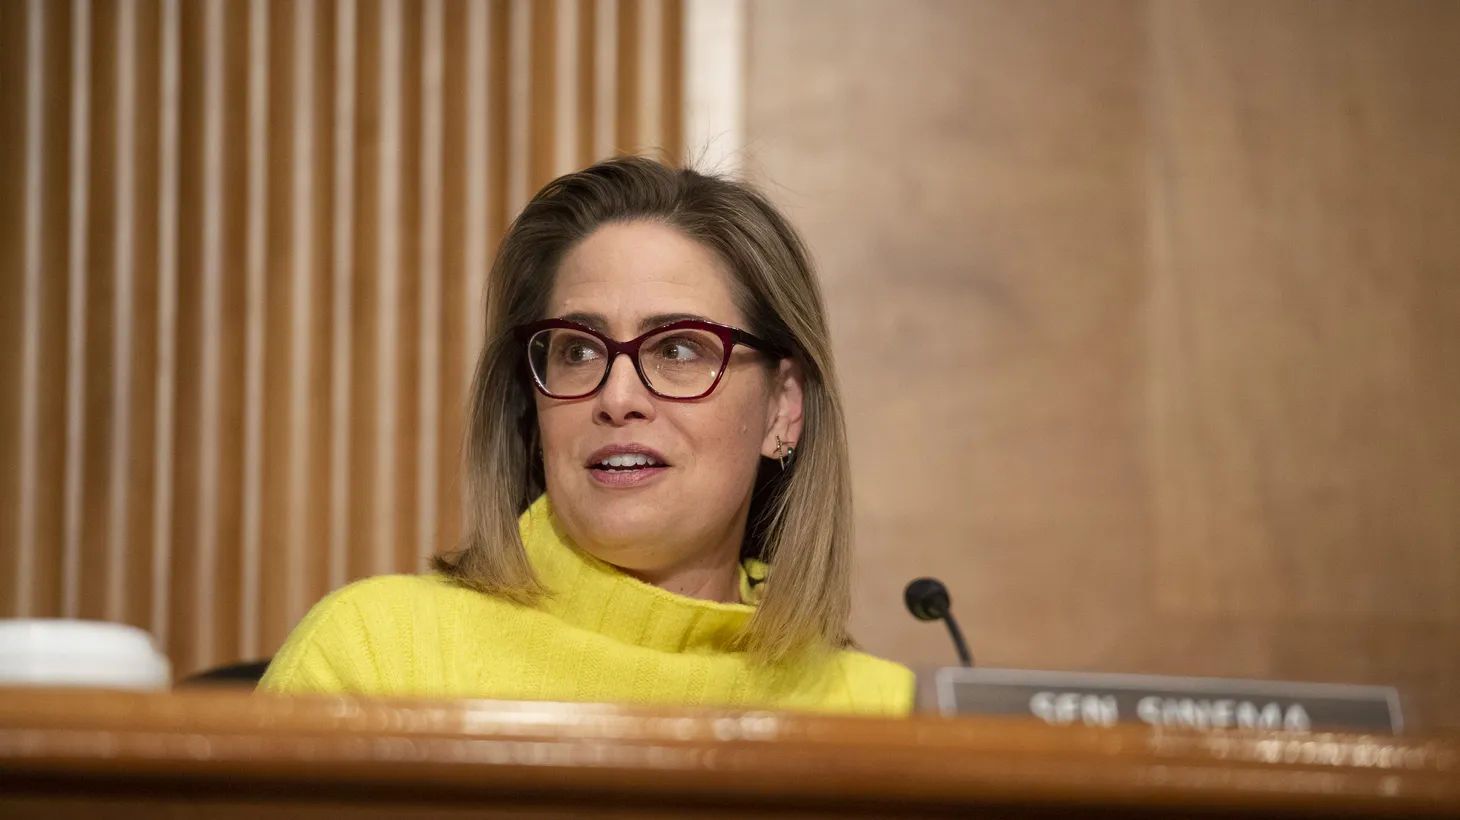 Sen. Krysten Sinema, I-AZ, speaks during a hearing to examine nominations of Shalanda D. Young, from Louisiana, and Nani Coloretti, from California, at the US Capitol in Washington, DC on Tuesday, February 1, 2022.